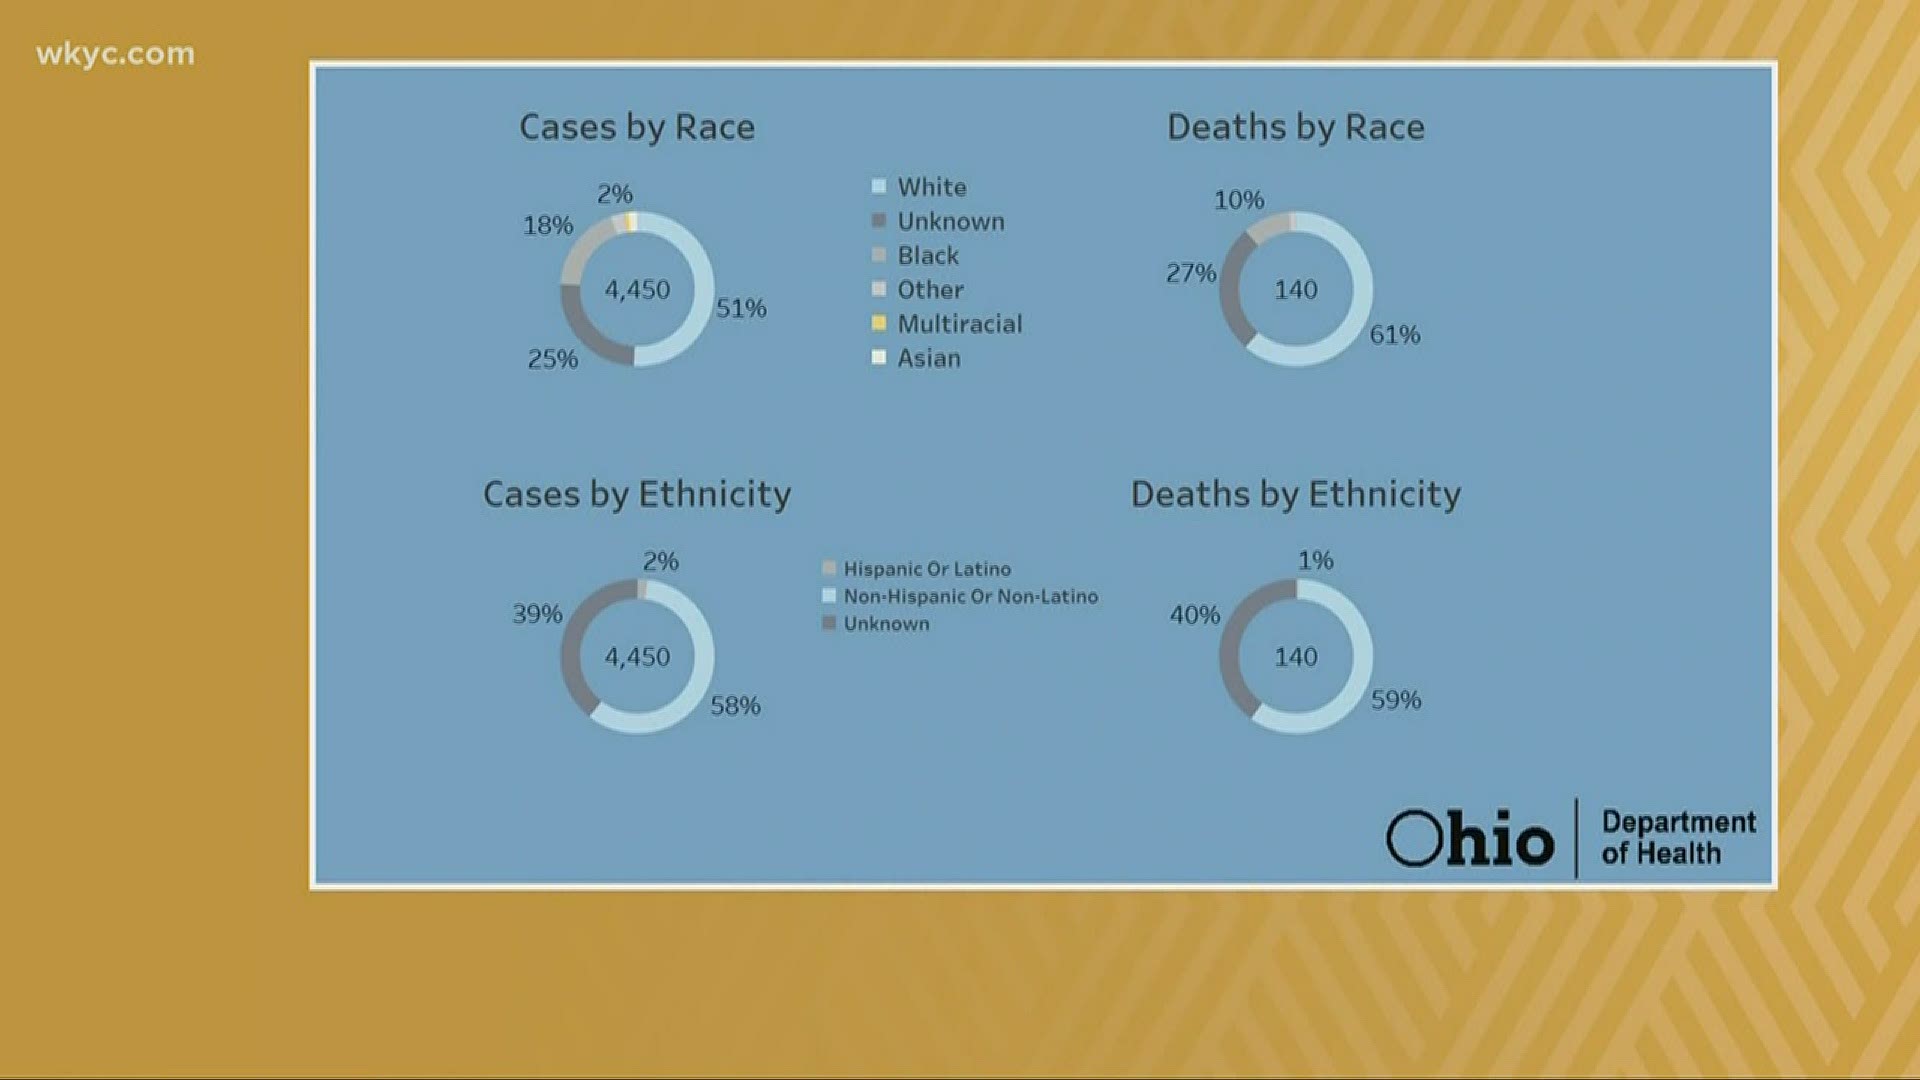 Coronavirus has taken a greater toll on African Americans than on other racial groups in America. Yet in Ohio, we don't have clear numbers.